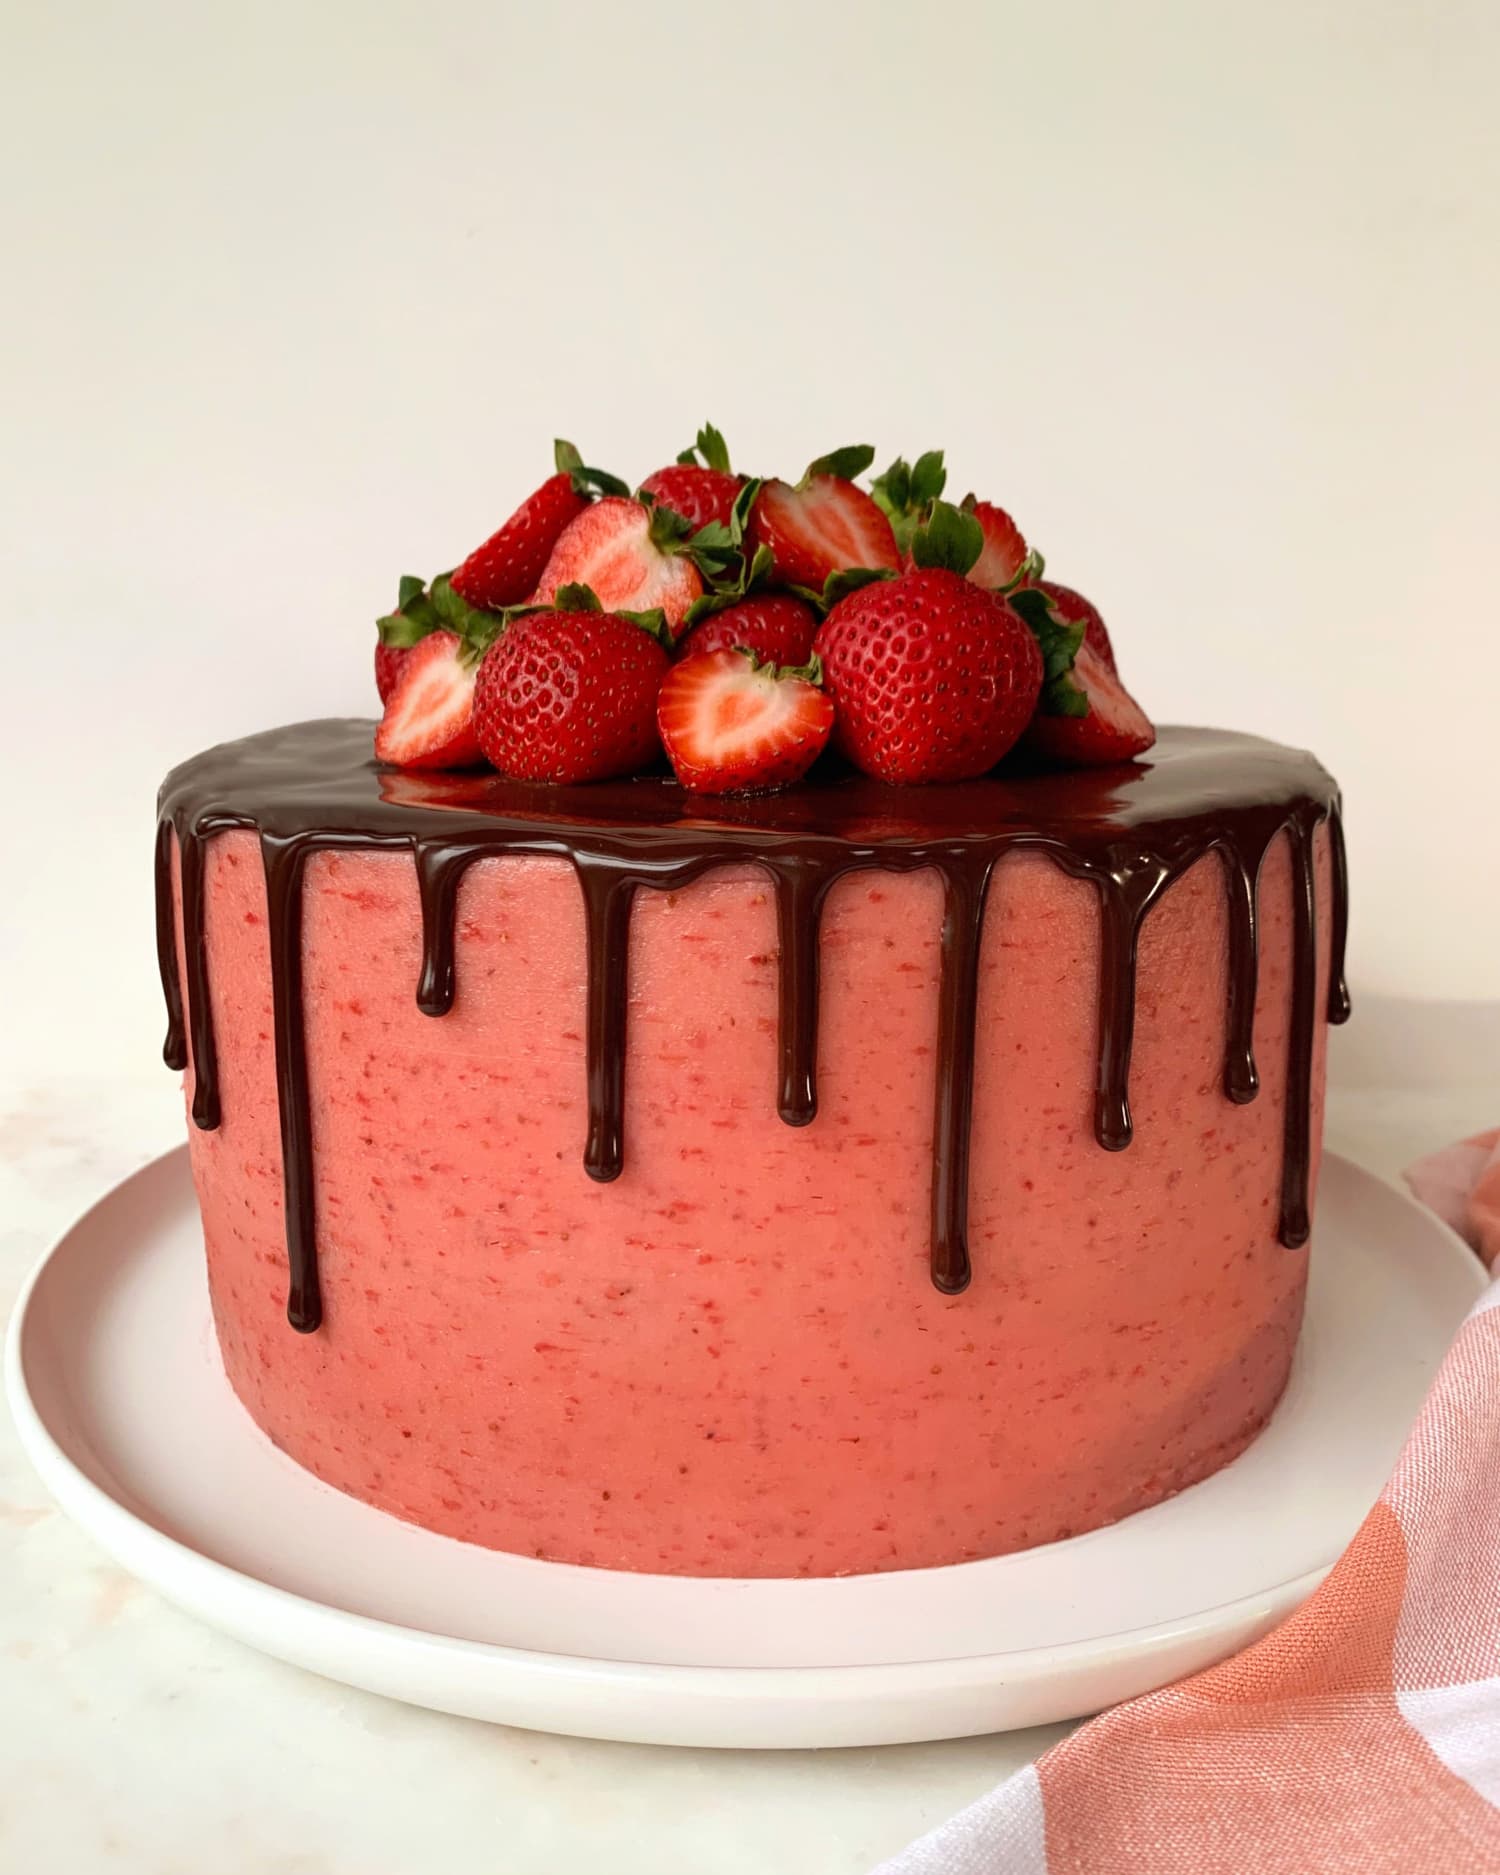 Chocolate Strawberry Cake Is Fresh, Fruity, Chocolate-y, and Luxurious